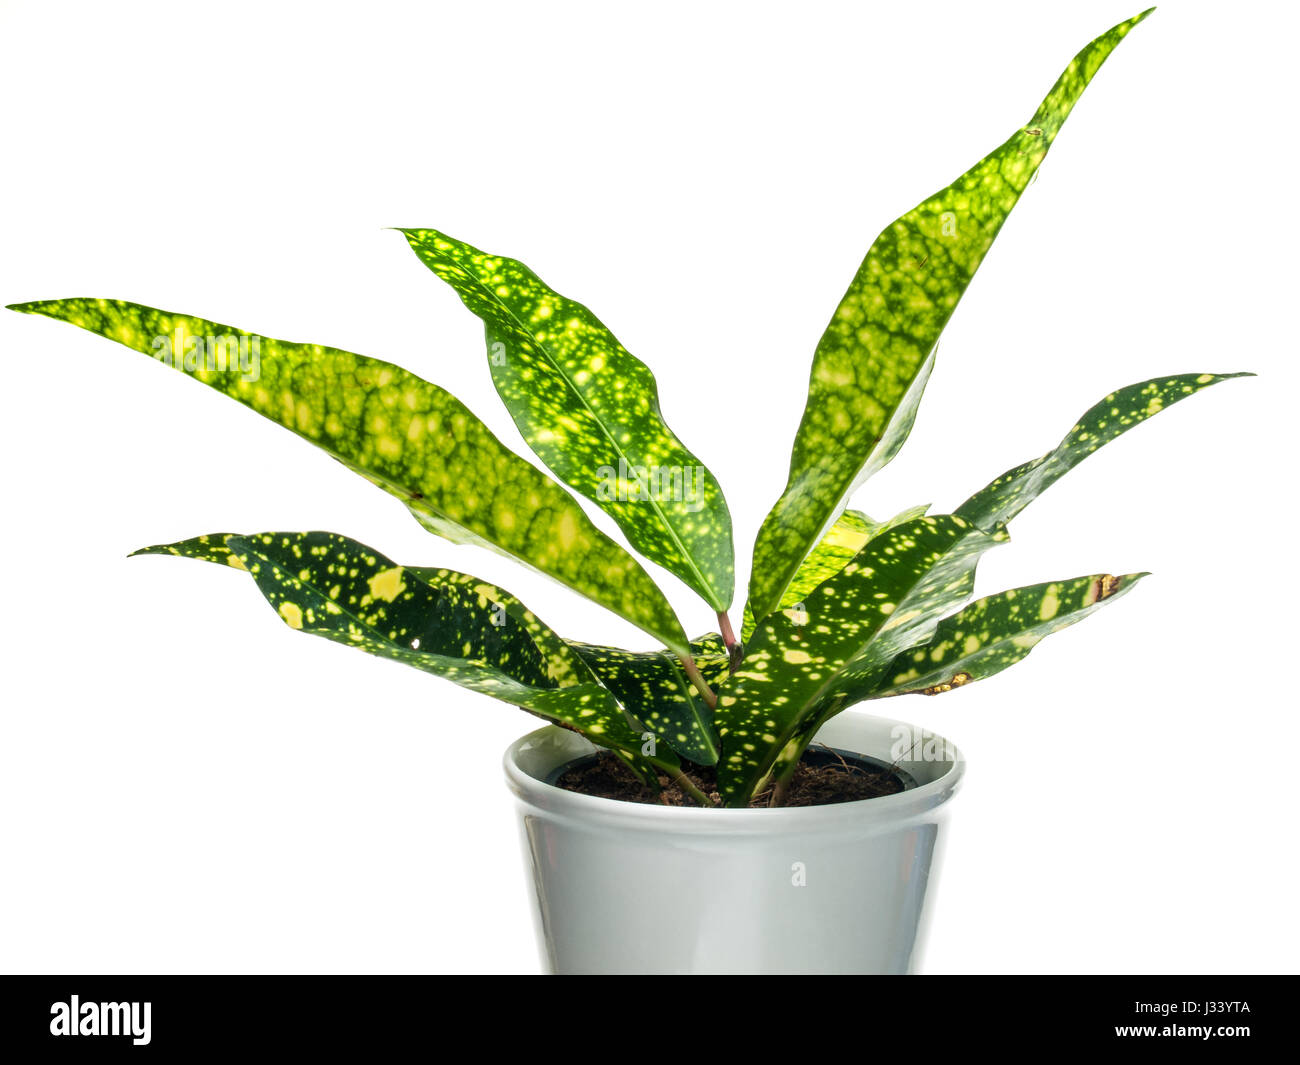 The aglaonema is a popular houseplant in the USA and is relatively easy to grow though it will not tolerate full sun. Stock Photo